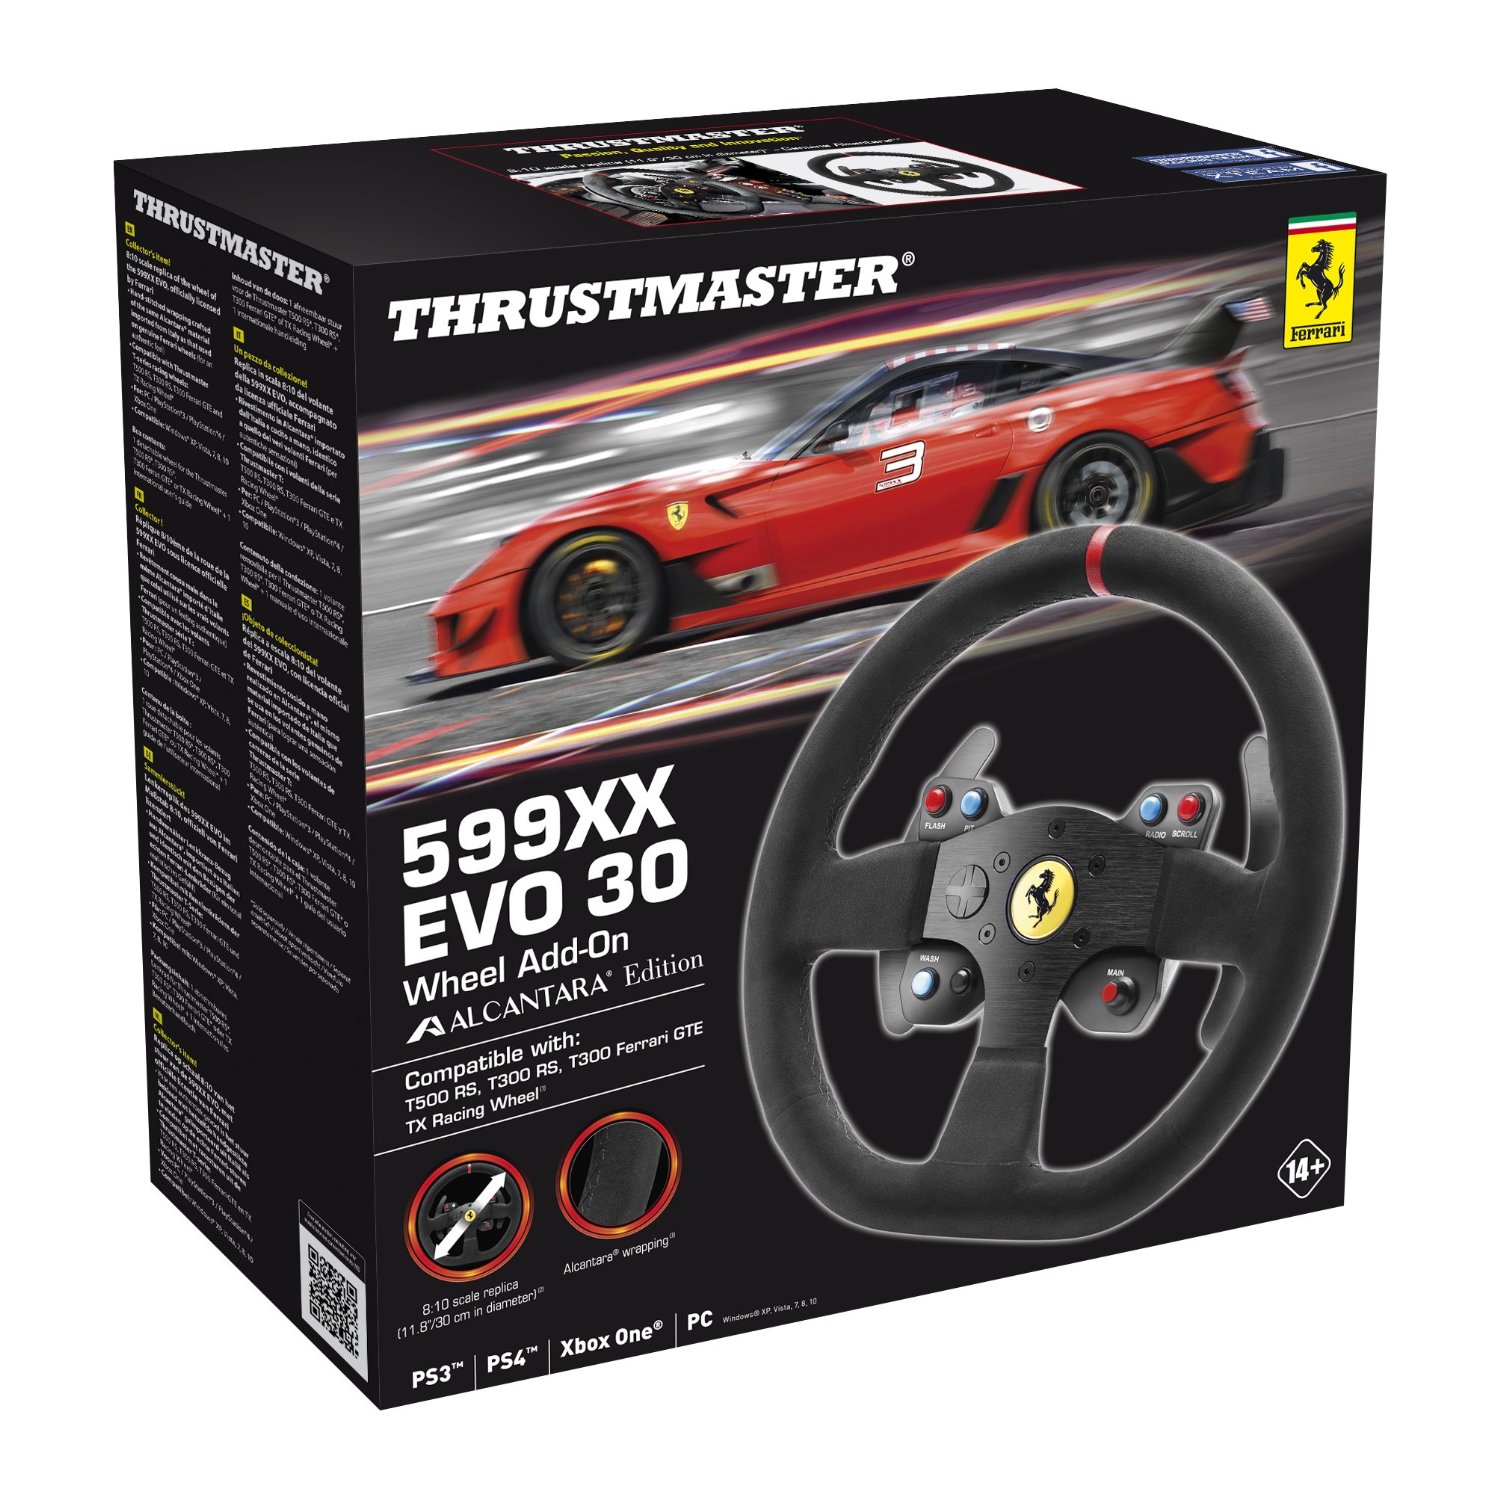 Details And Images For The Thrustmaster Vg Ferrari 599xx Evo Wheel Add On Alcantara Edition Game Idealist